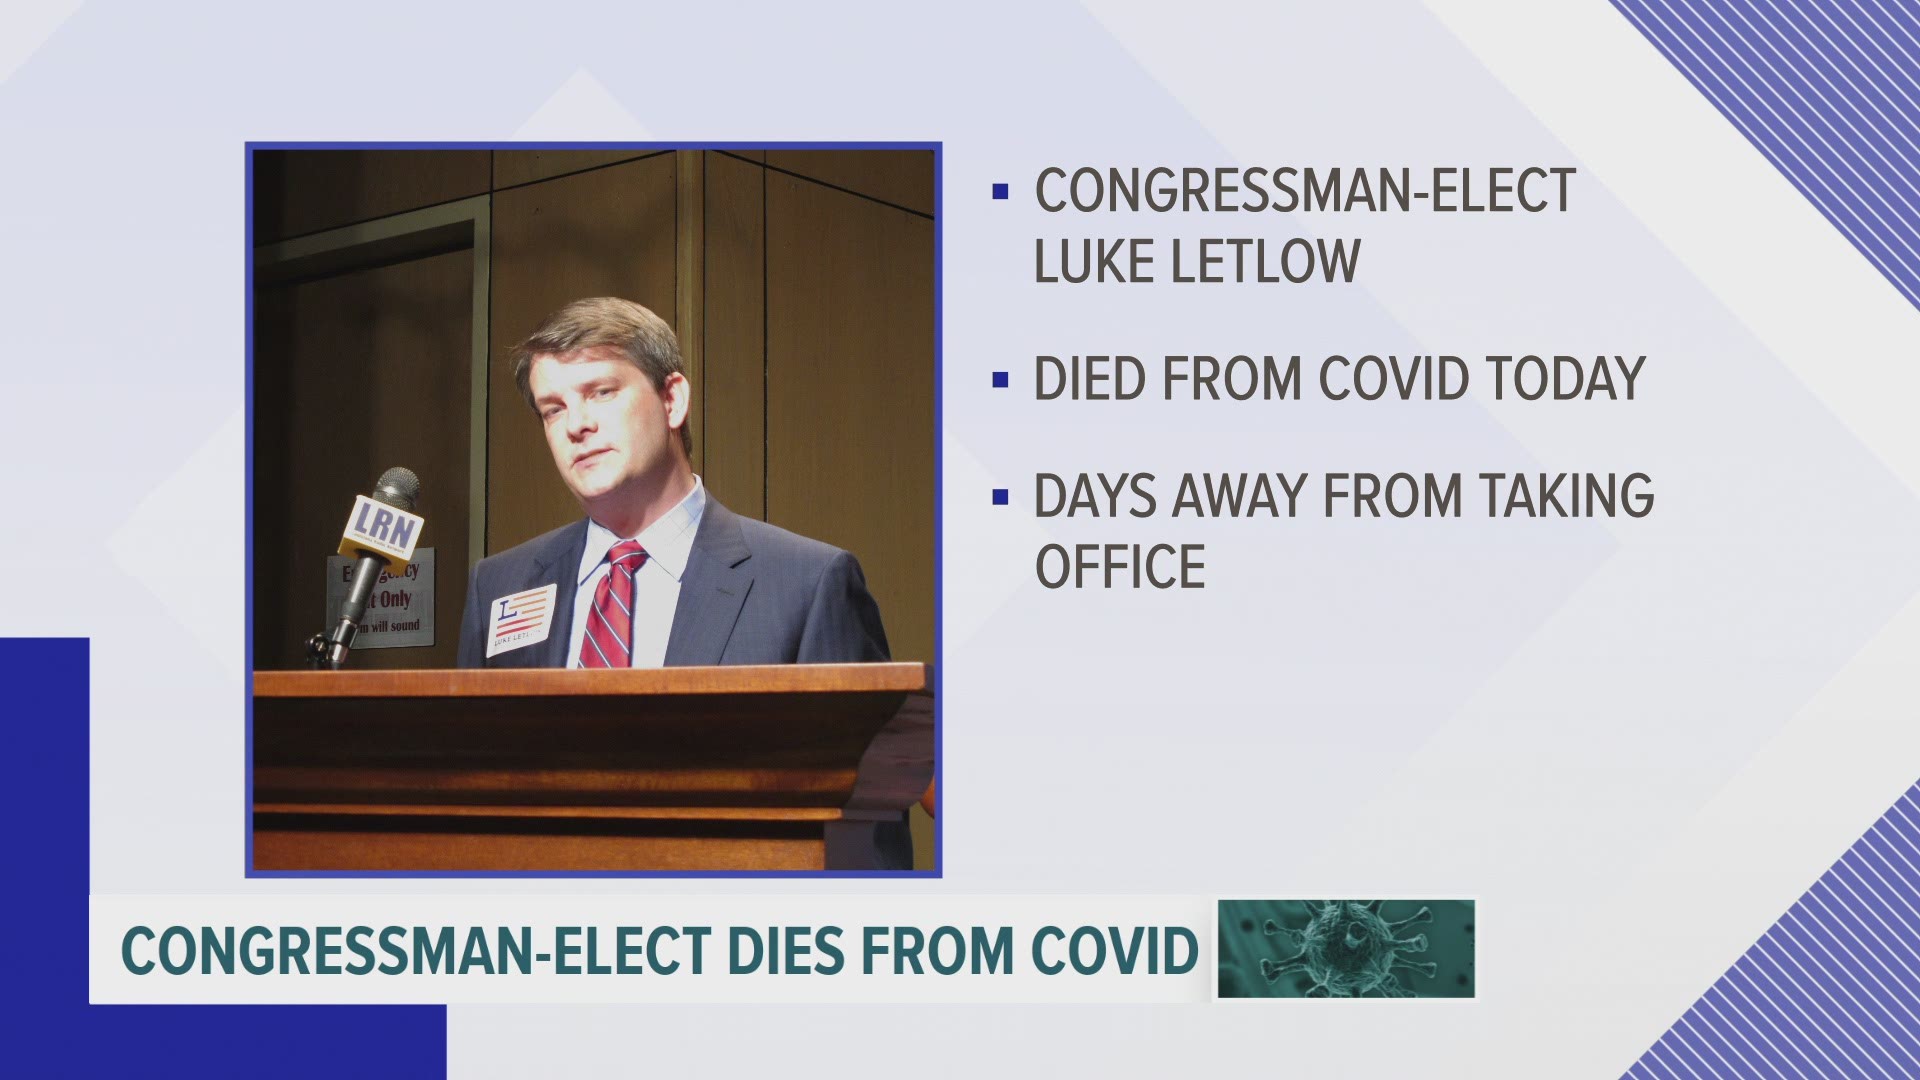 Republican Louisiana congressman-elect Luke Letlow, 41, died Tuesday from COVID-19 complications, just days before being sworn in.